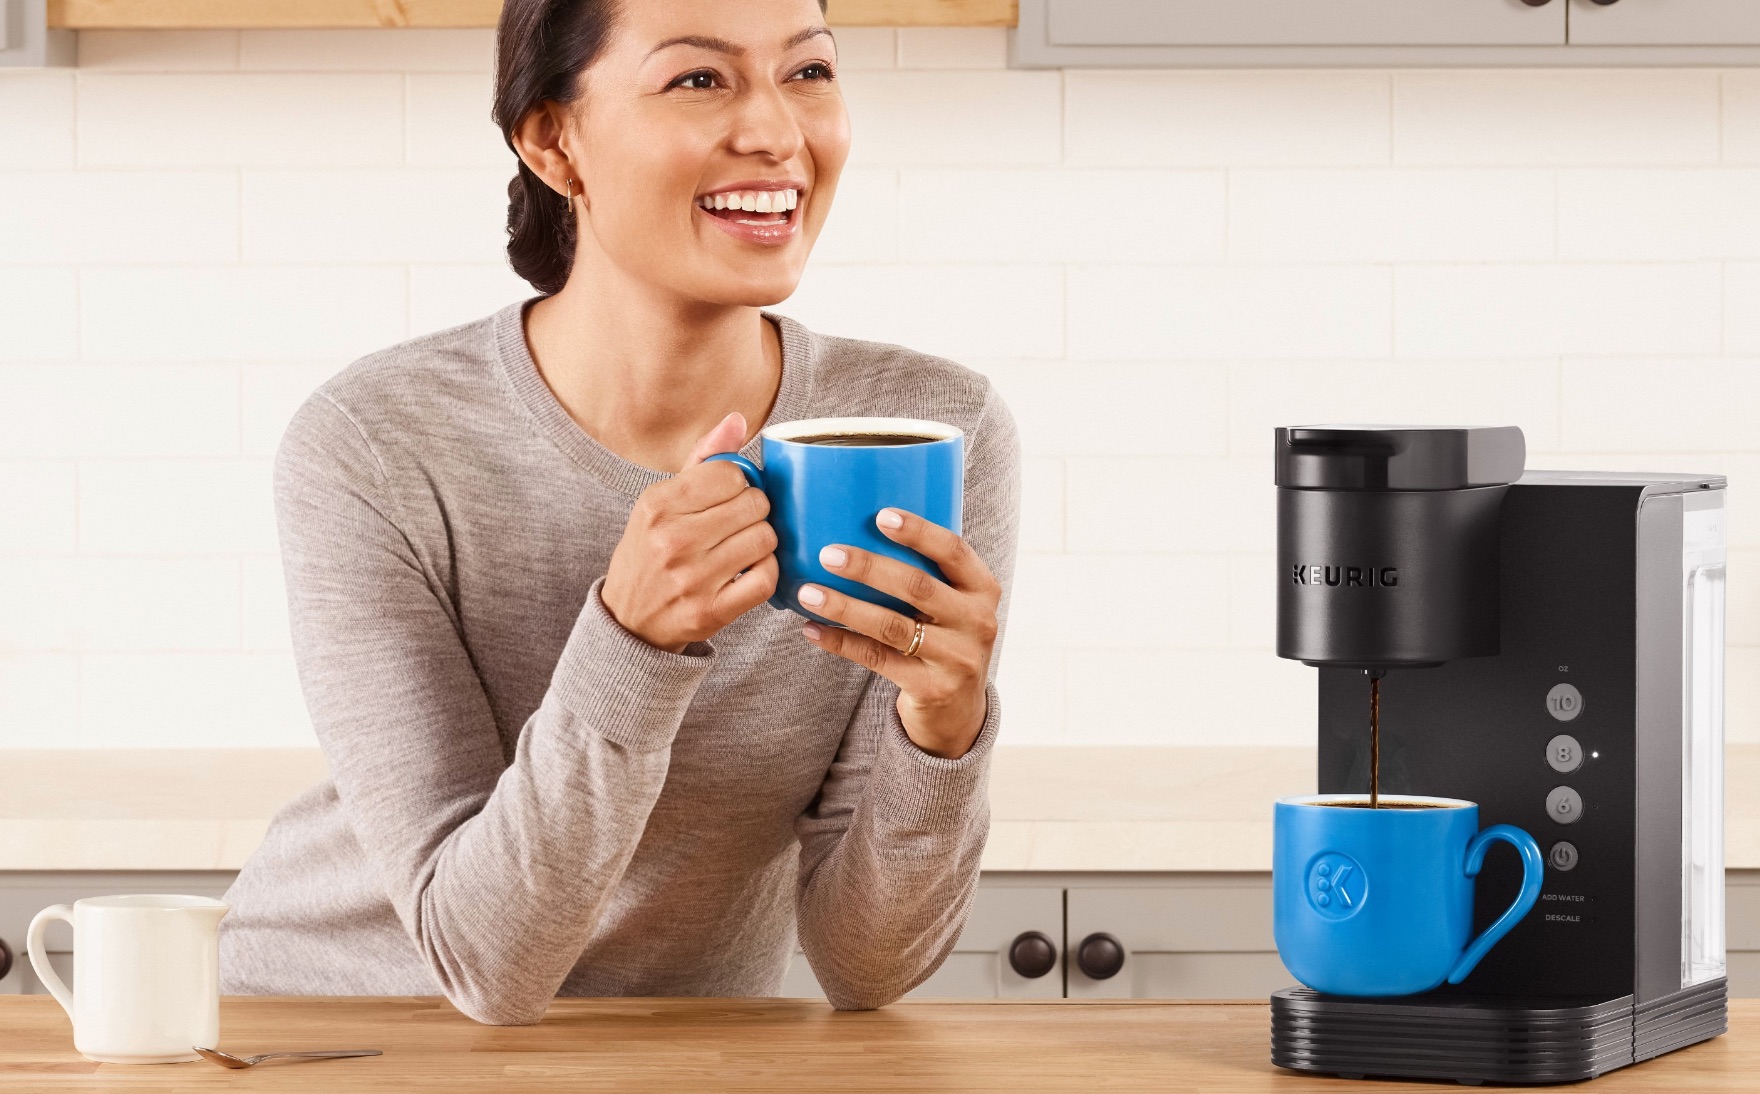 Black Friday  kitchen deals: Save on Keurig, Cuisinart, and more -  Reviewed